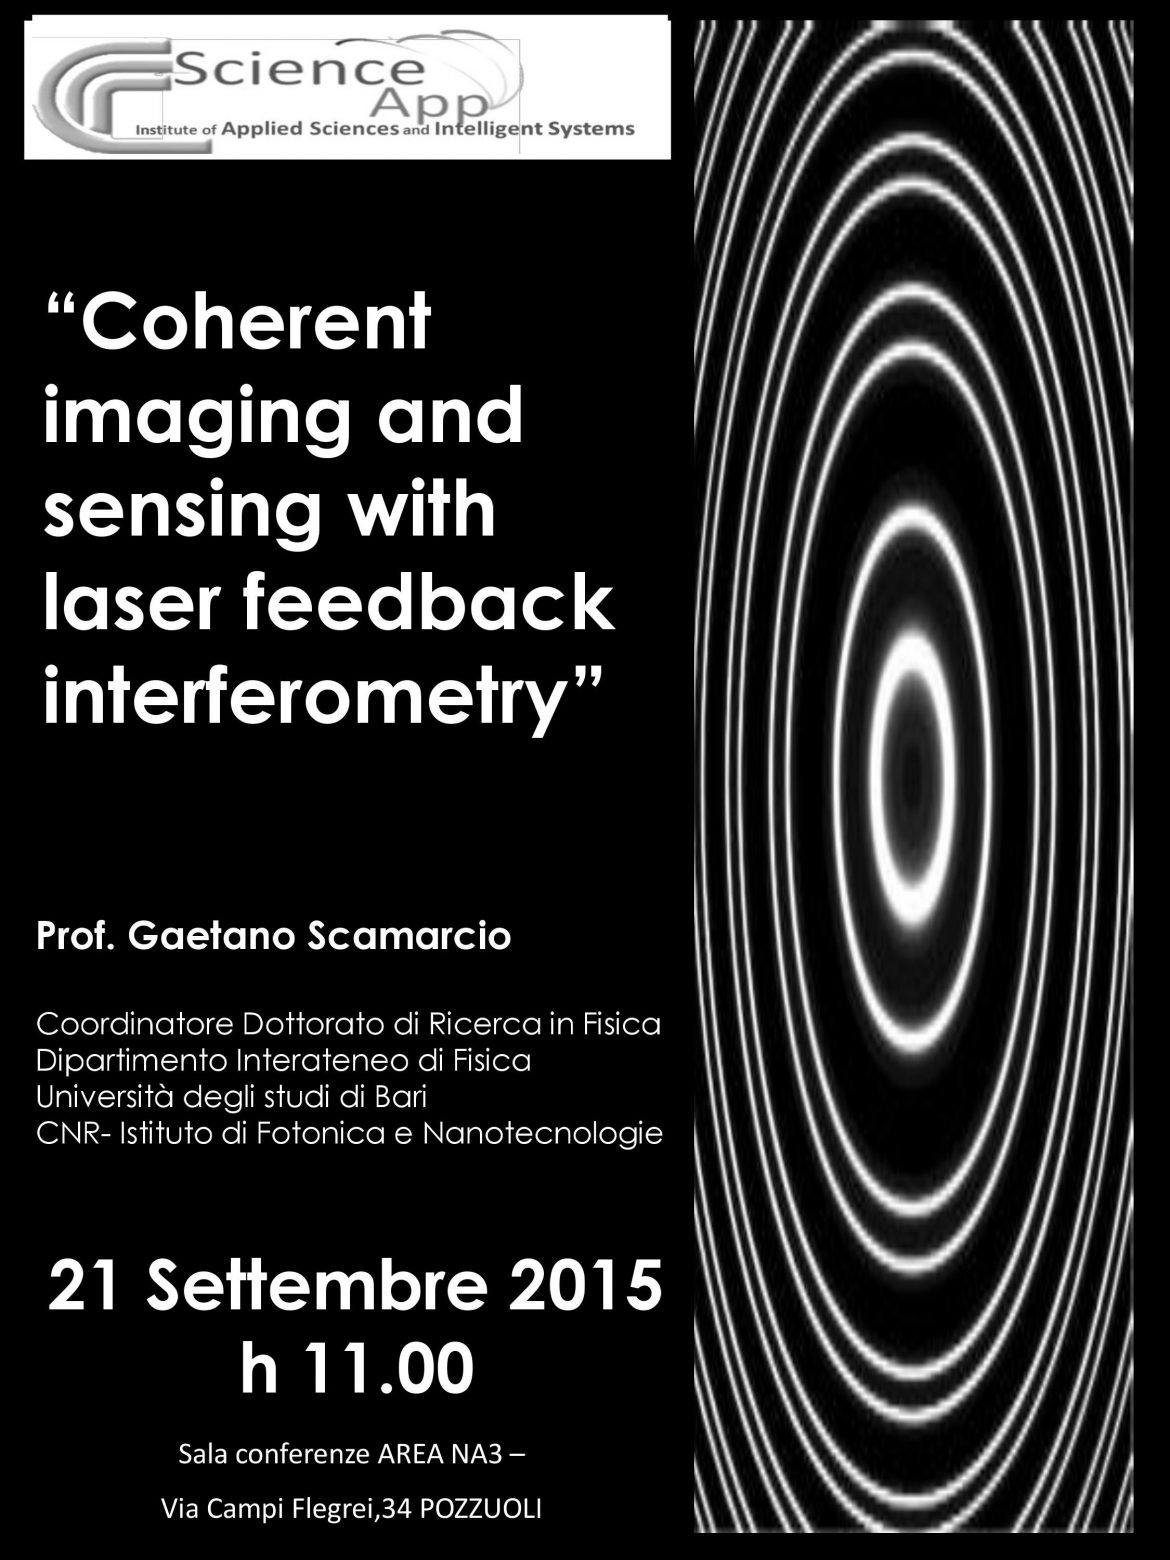 Coherent imaging and sensing with laser feedback interferometry